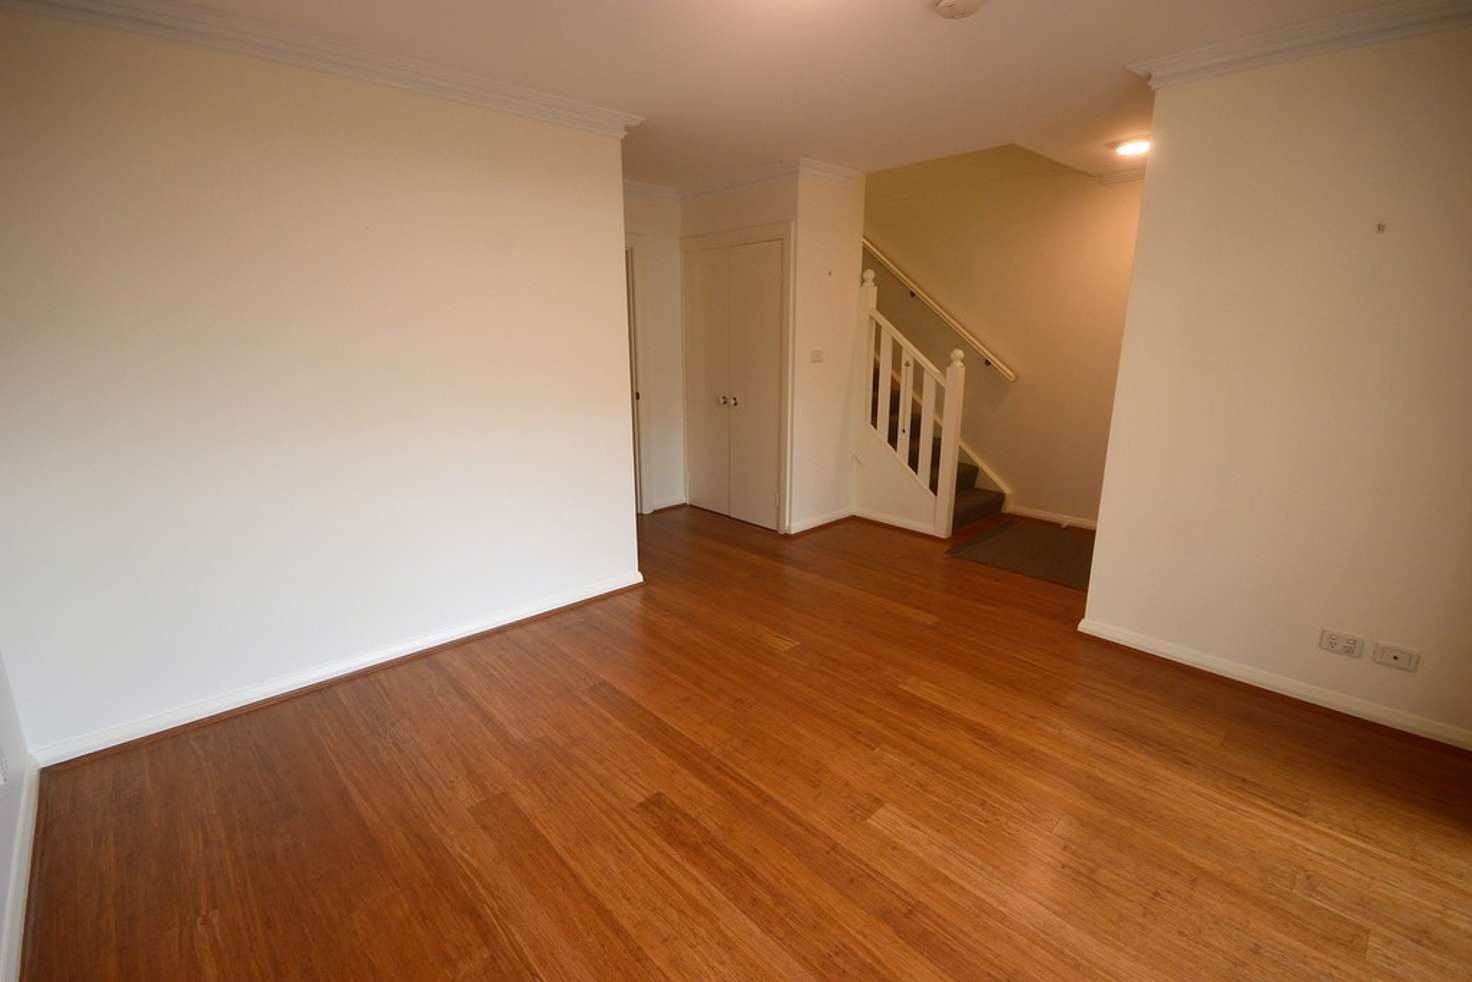 Main view of Homely house listing, 11/165-169 Allen St, Leichhardt NSW 2040